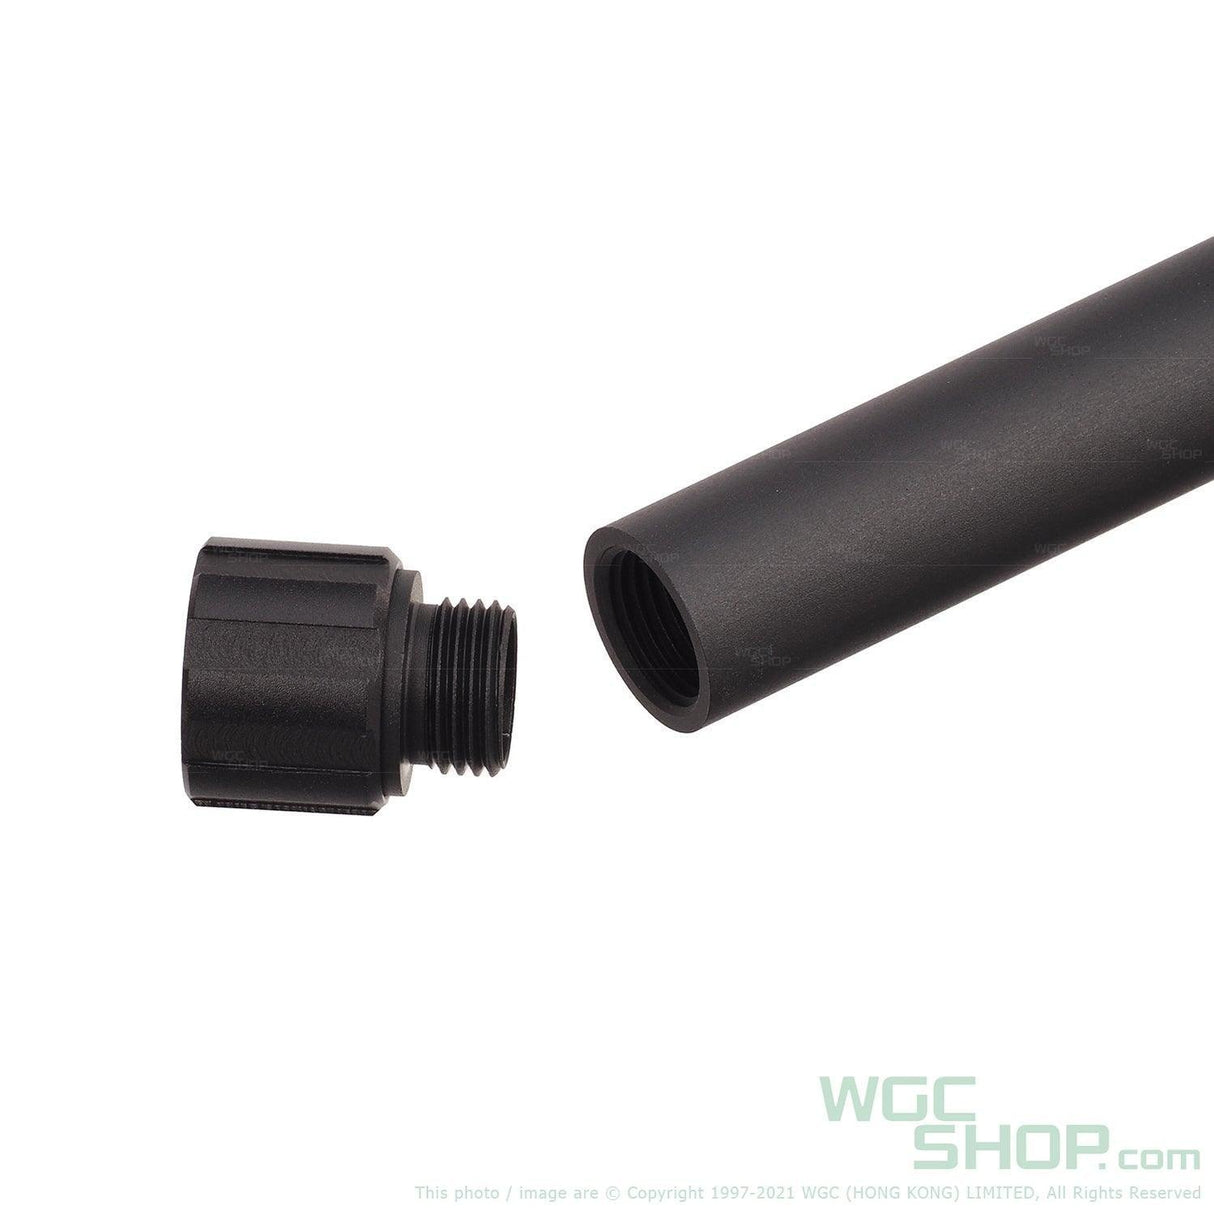 C&C TAC Threaded Outer Barrel for SIG Air / VFC M18 GBB Airsoft - WGC Shop